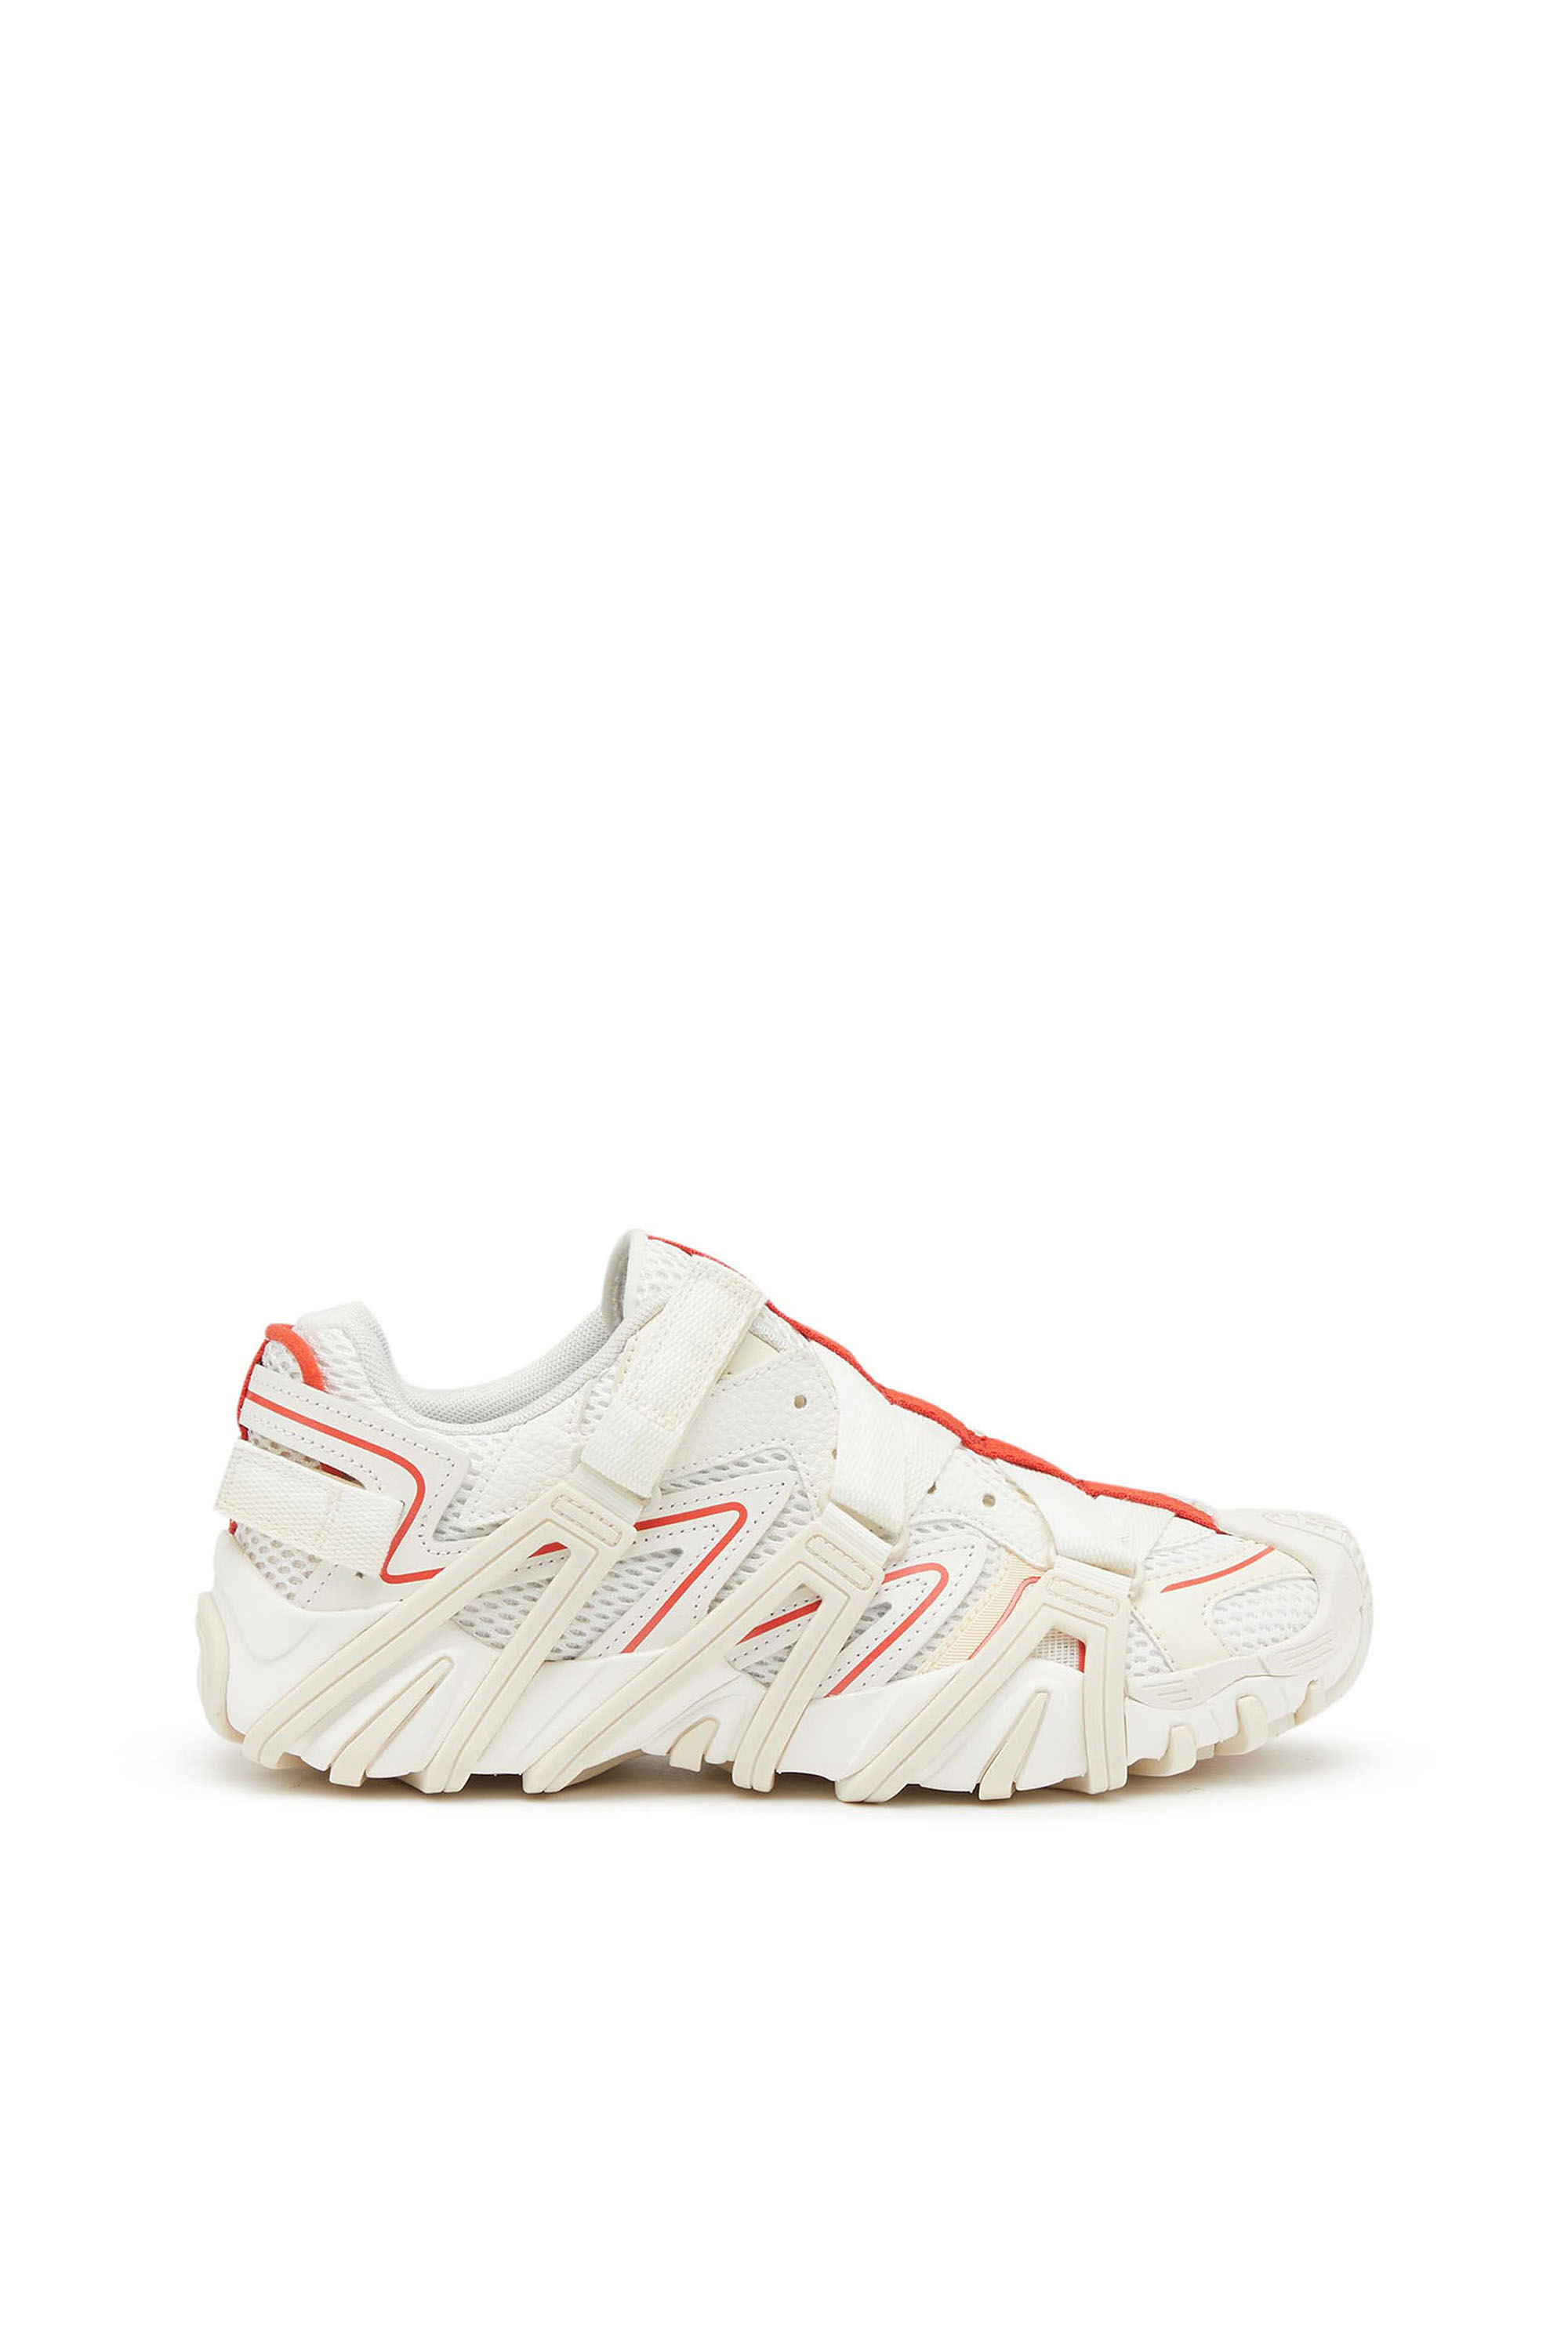 Diesel Cage Sneakers In Mesh And Leather In Multicolor